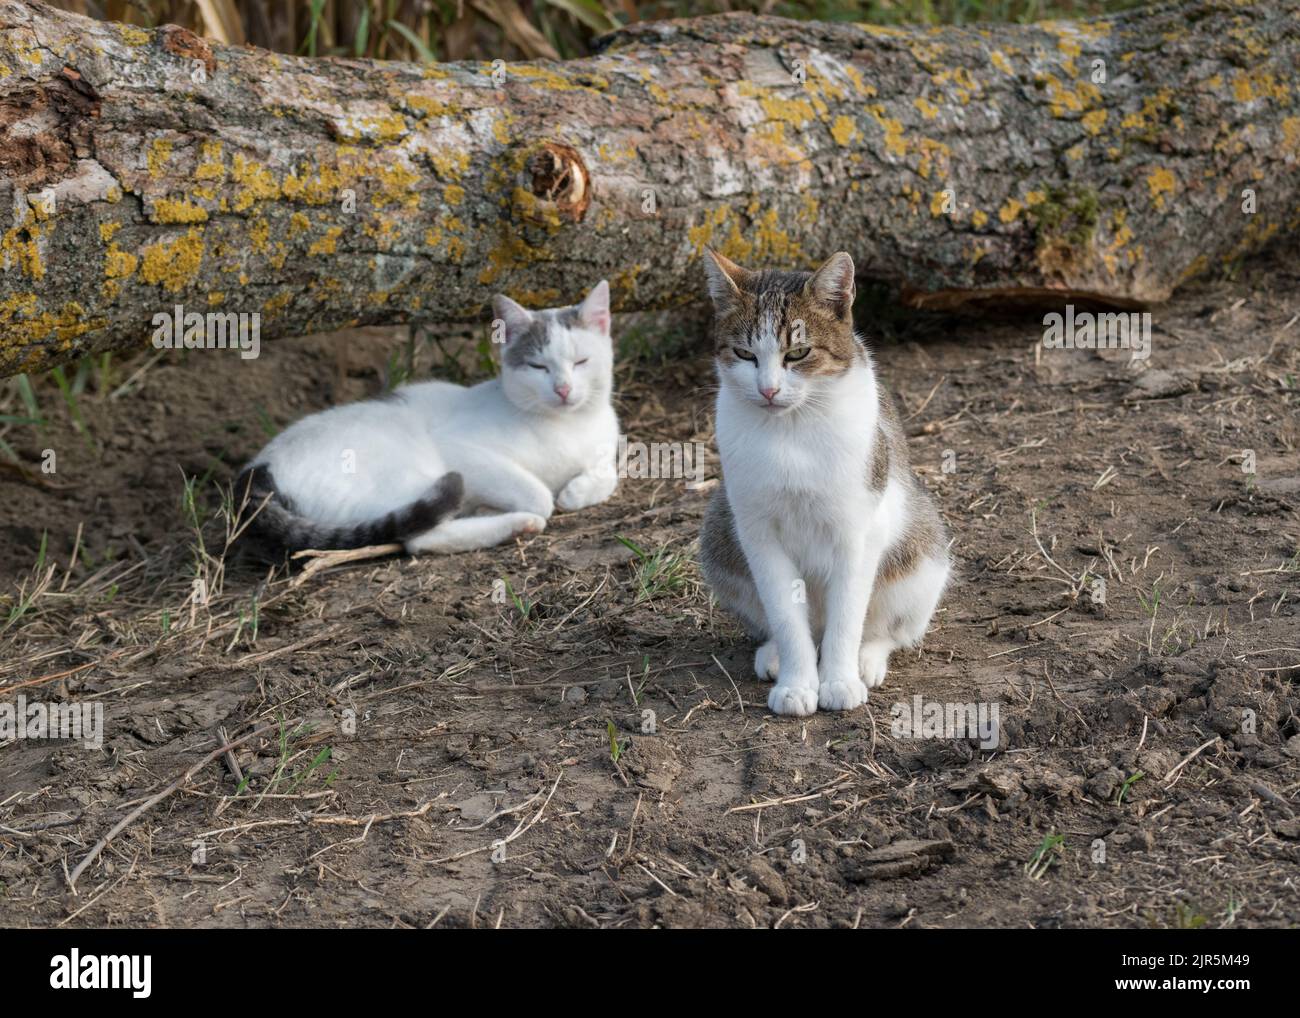 Two lazy cats in nature, a gray-white cat sitting on the ground in front of another cat lying lazily under a log with yellow lichens on its bark in au Stock Photo